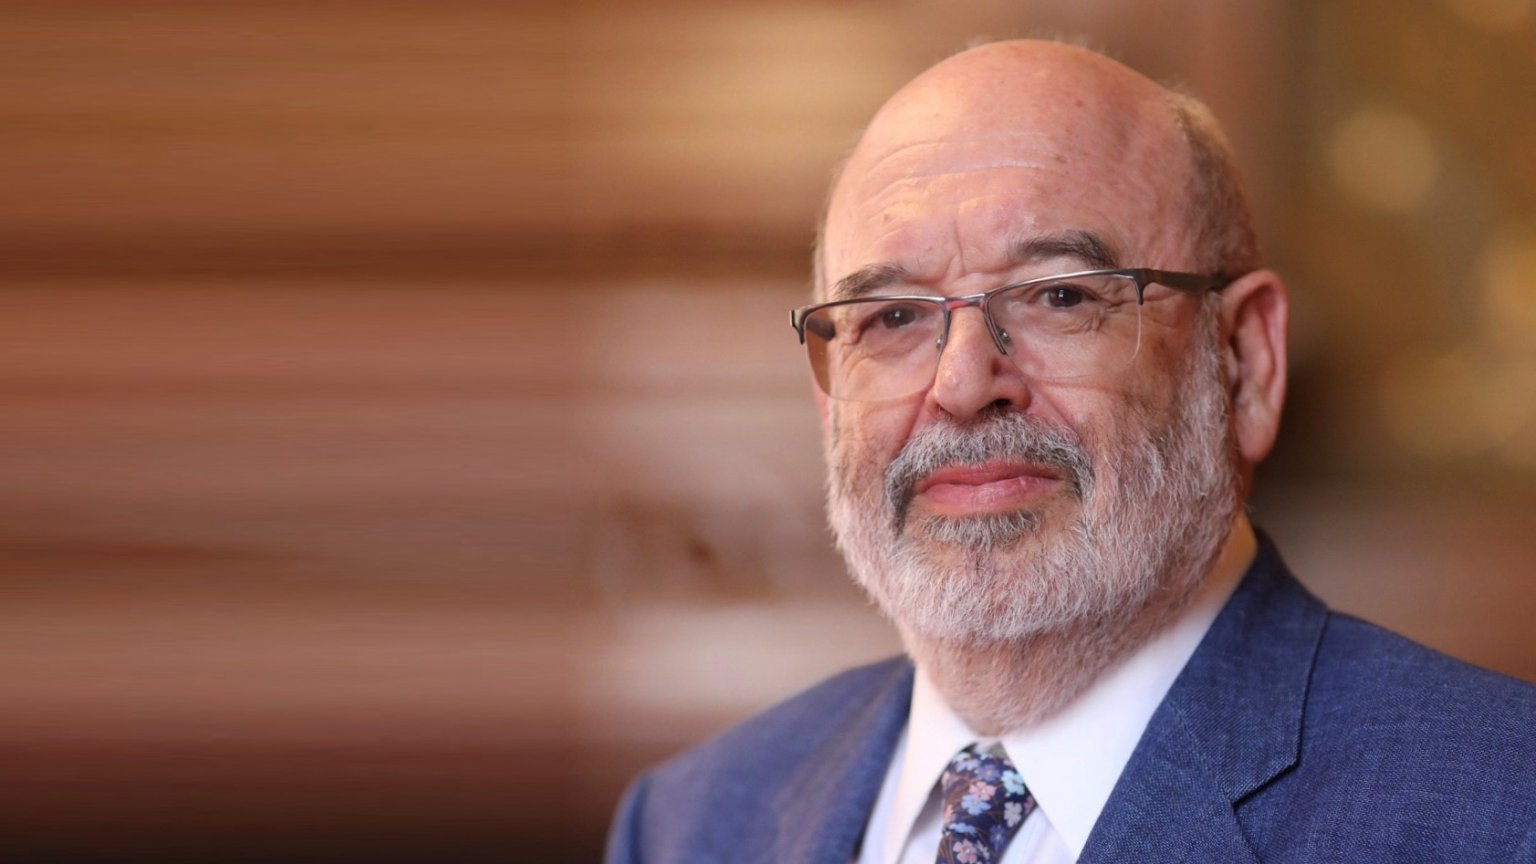 An extract from Peter Gluckman’s speech to the Endless Frontier Symposium